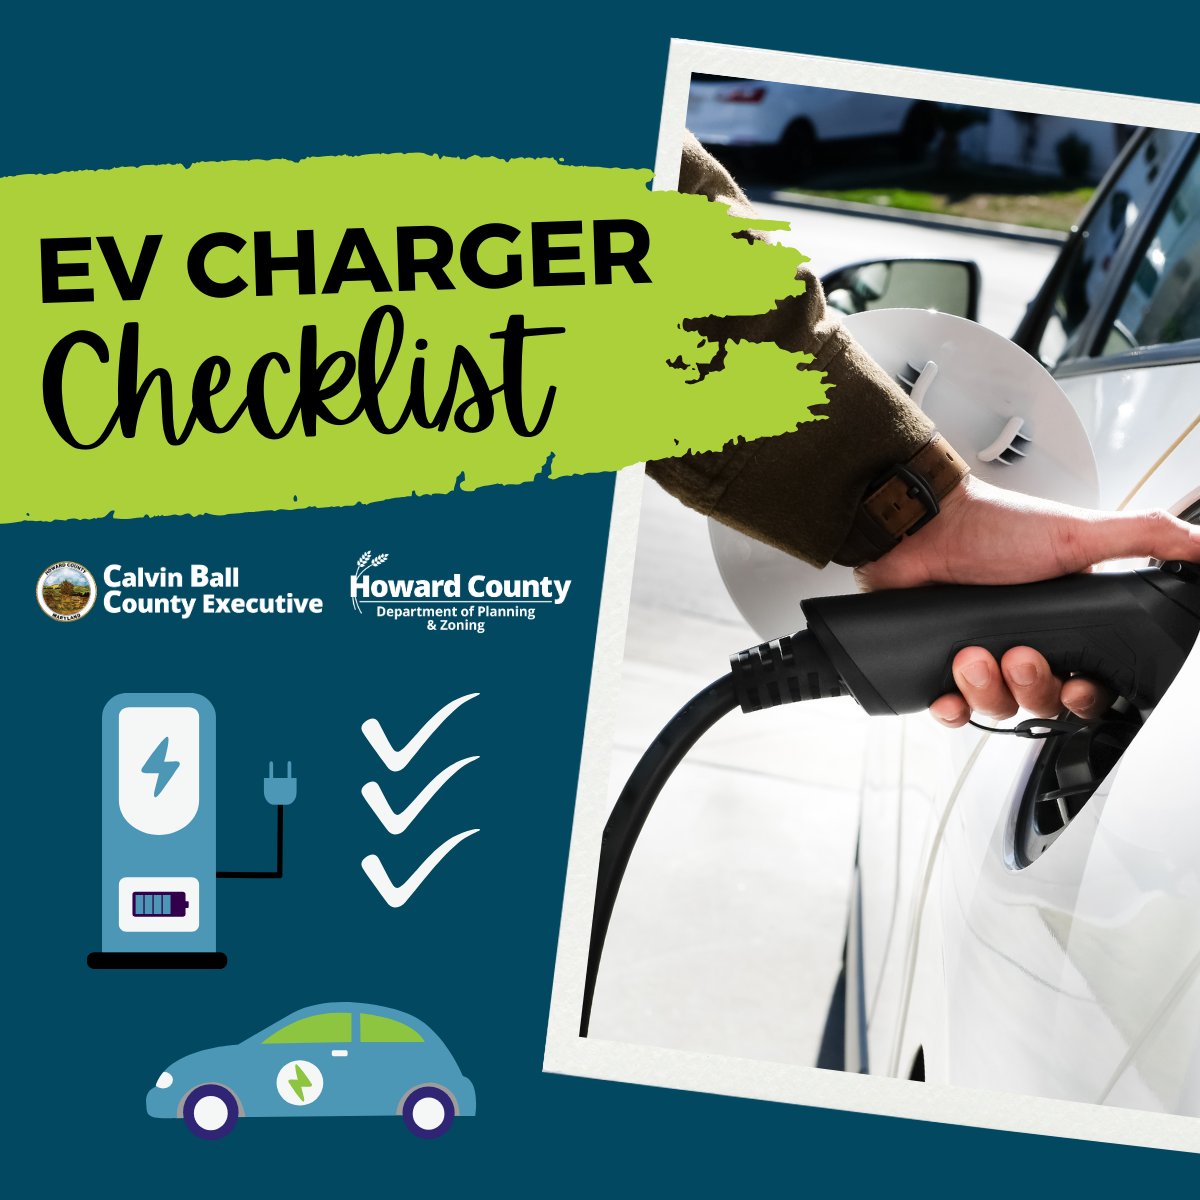 To assist #HoCoMD EV owners w/ installing a vehicle charger in a dedicated HOA parking spot, @HoCoGov DPZ has put together this checklist, tinyurl.com/EVChargerCheck…, outlining the items you’ll need to submit your EV charger approval submission. For ?s, email ded@howardcountymd.gov.